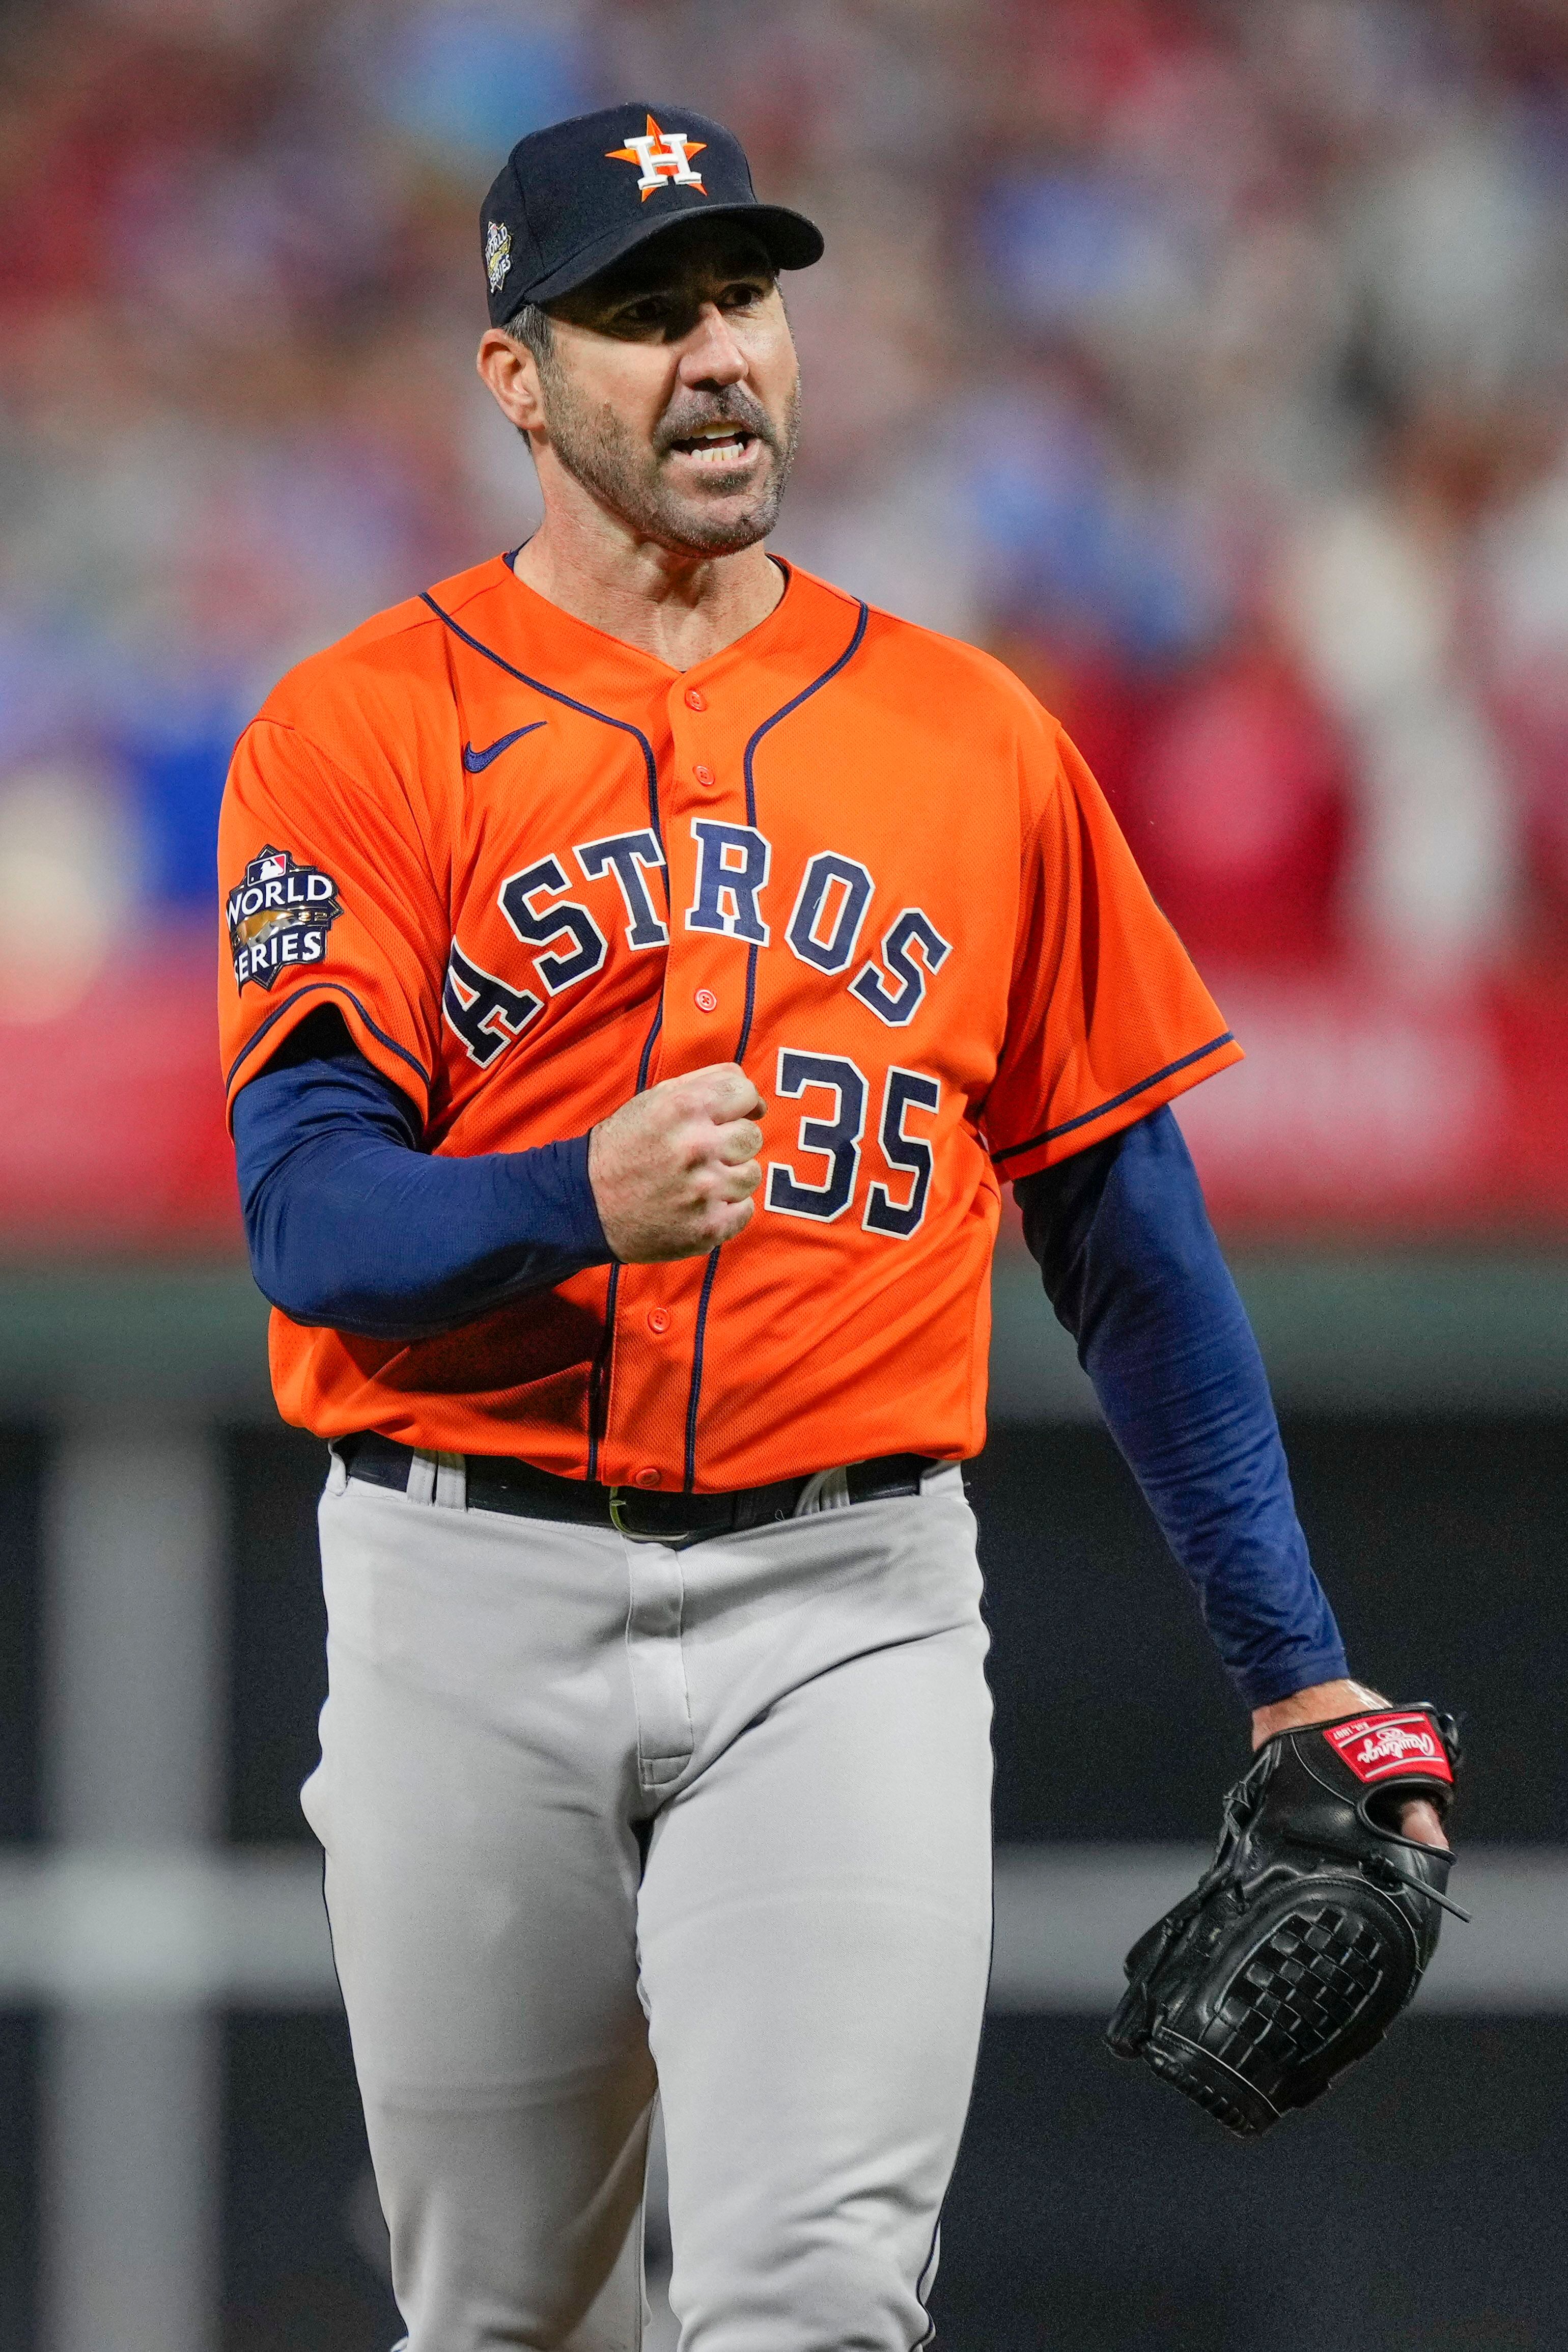 Why can't you buy an official Jeremy Peña Astro's jersey? : r/Astros